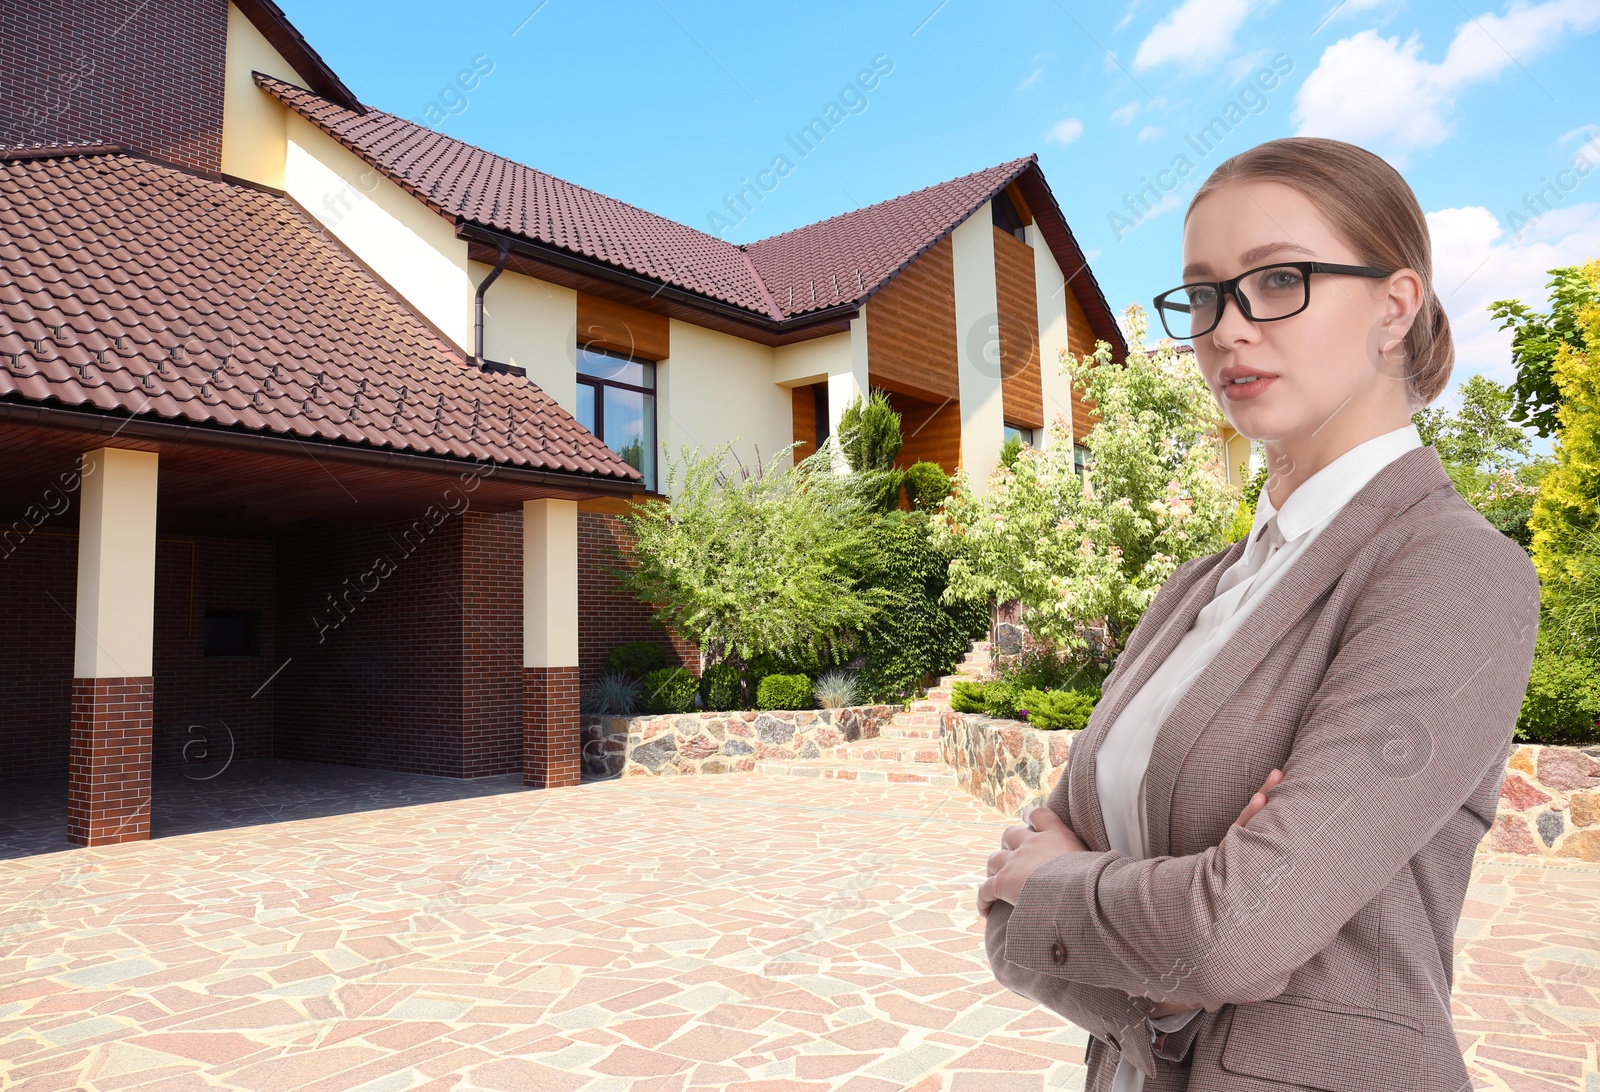 Image of Real estate agent against modern house with garden. Space for text